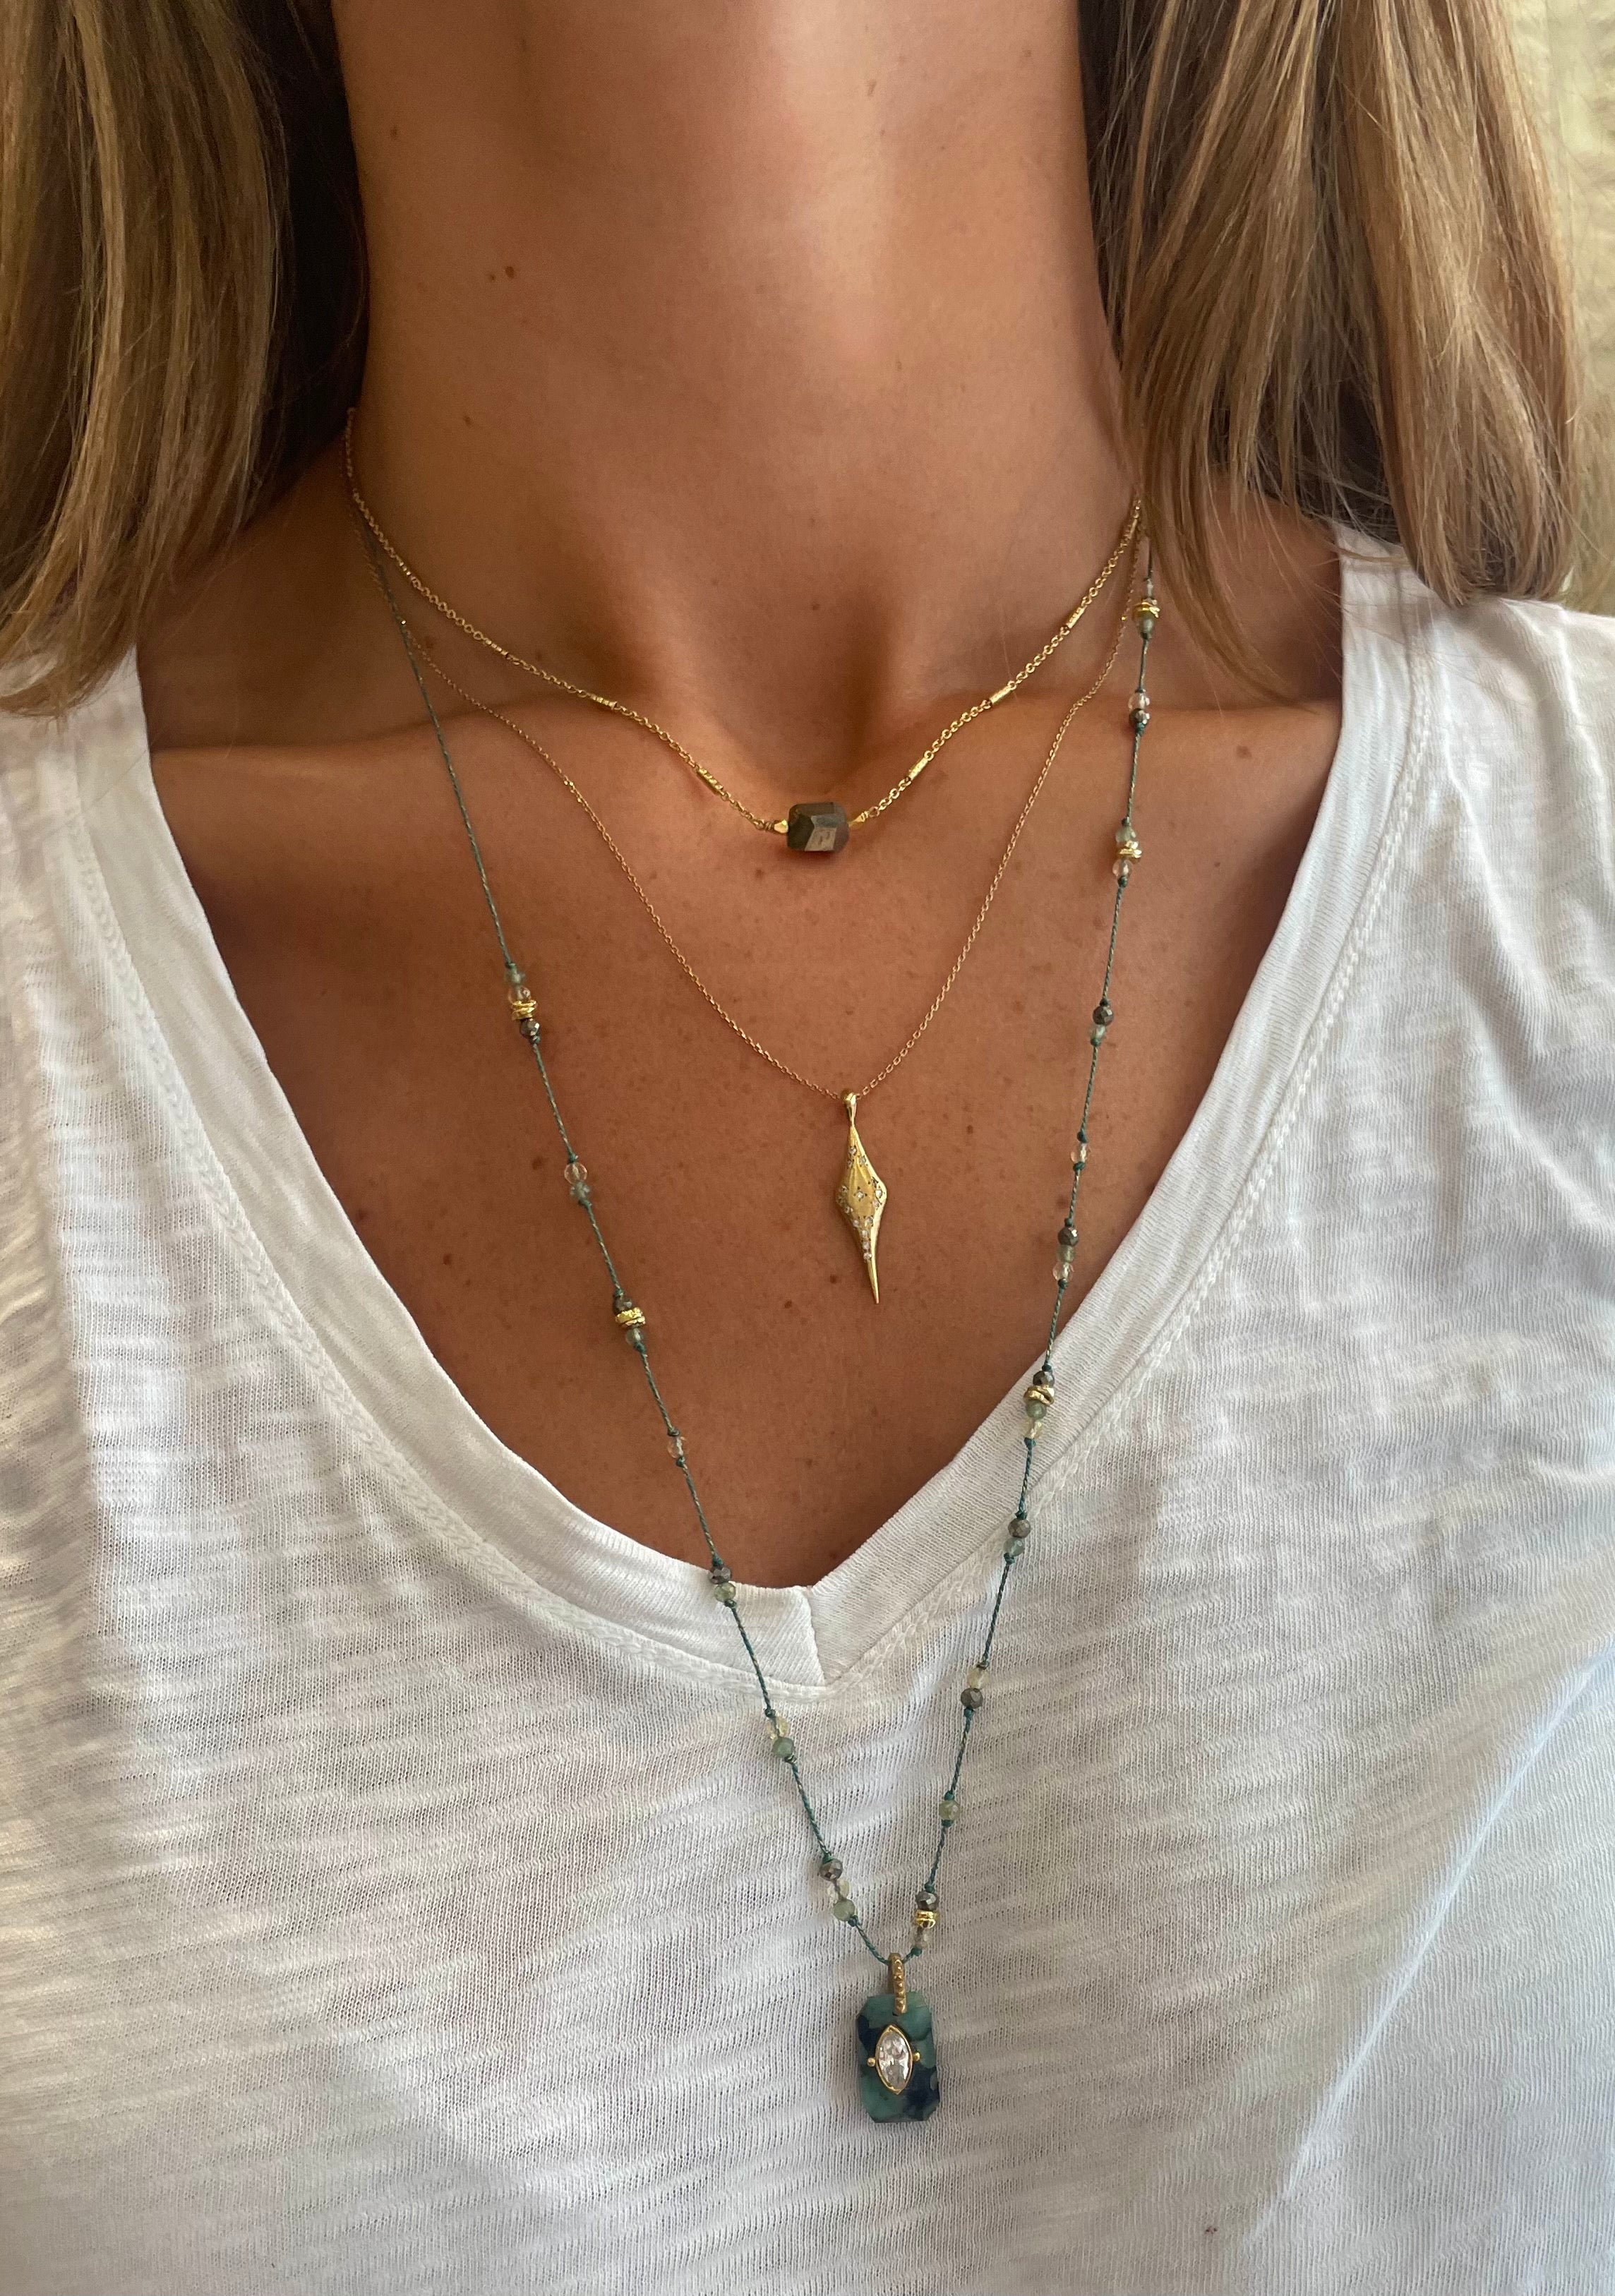 layering necklaces by hanka in pyrite, labradorite, gold plated necklaces